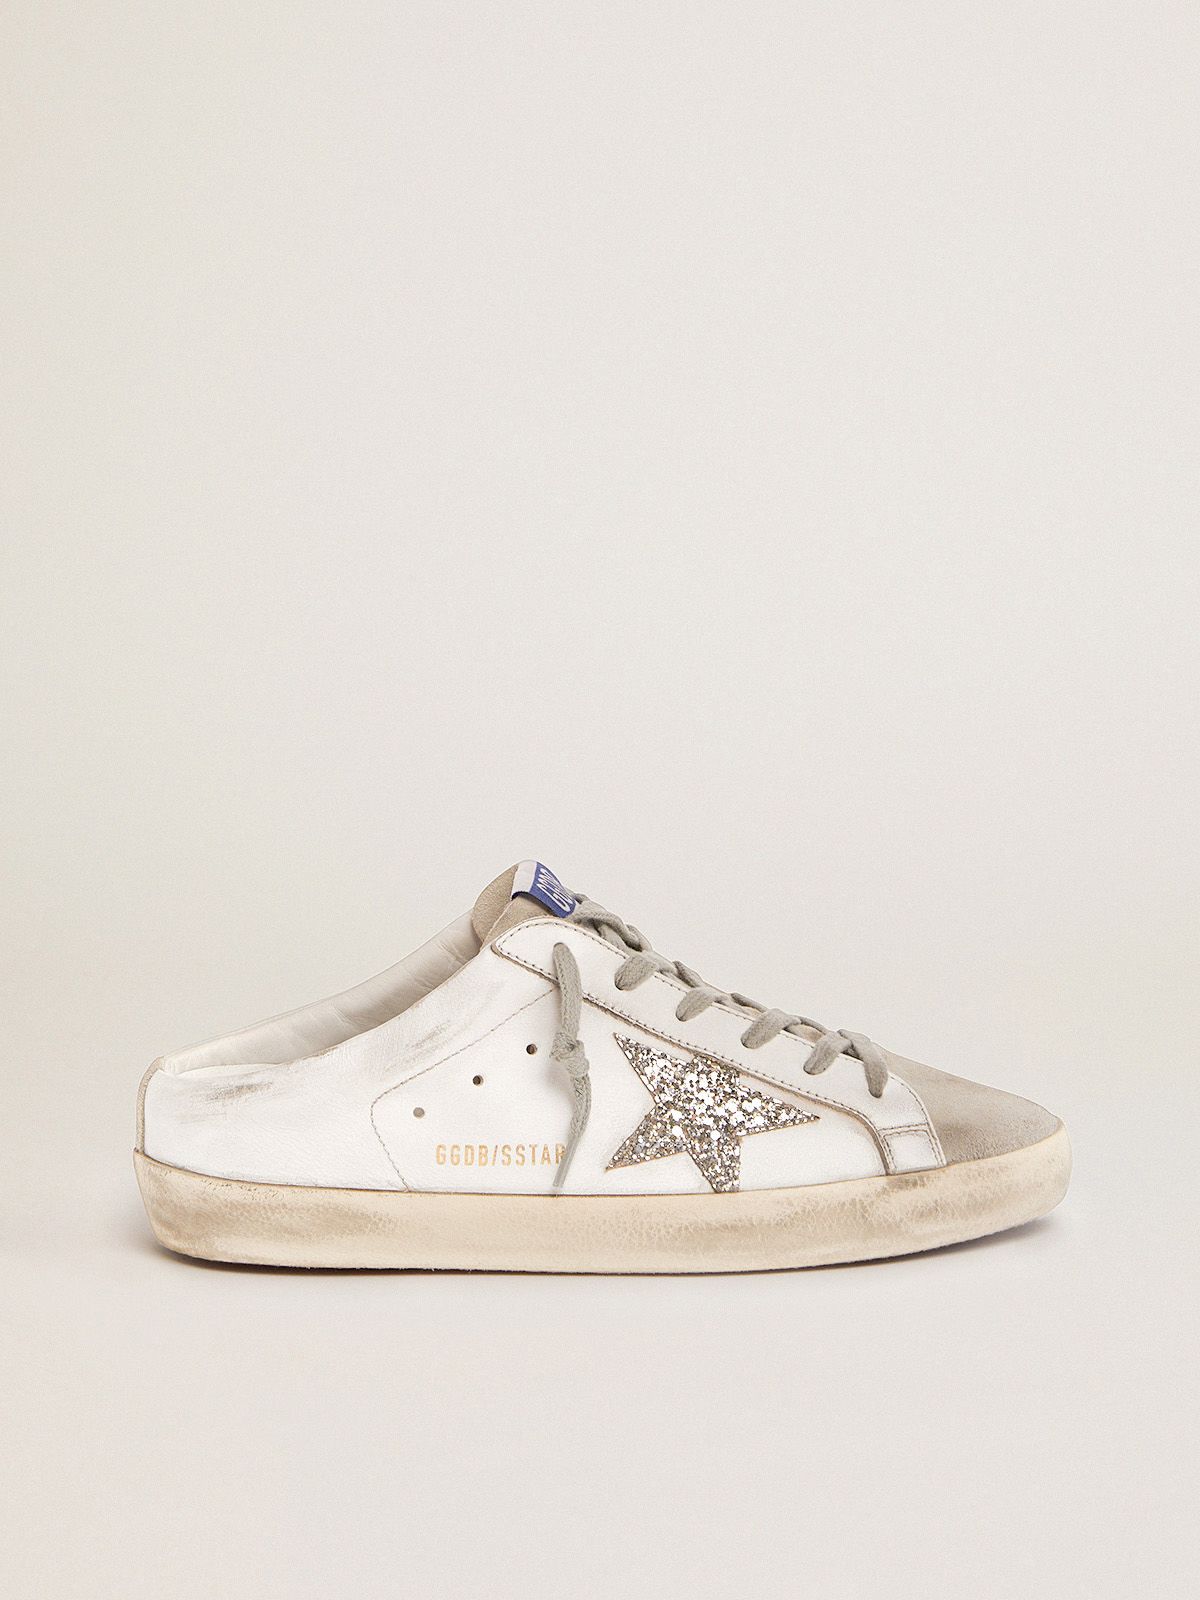 Super-Star Sabots in white leather and gray suede with silver glitter star | 